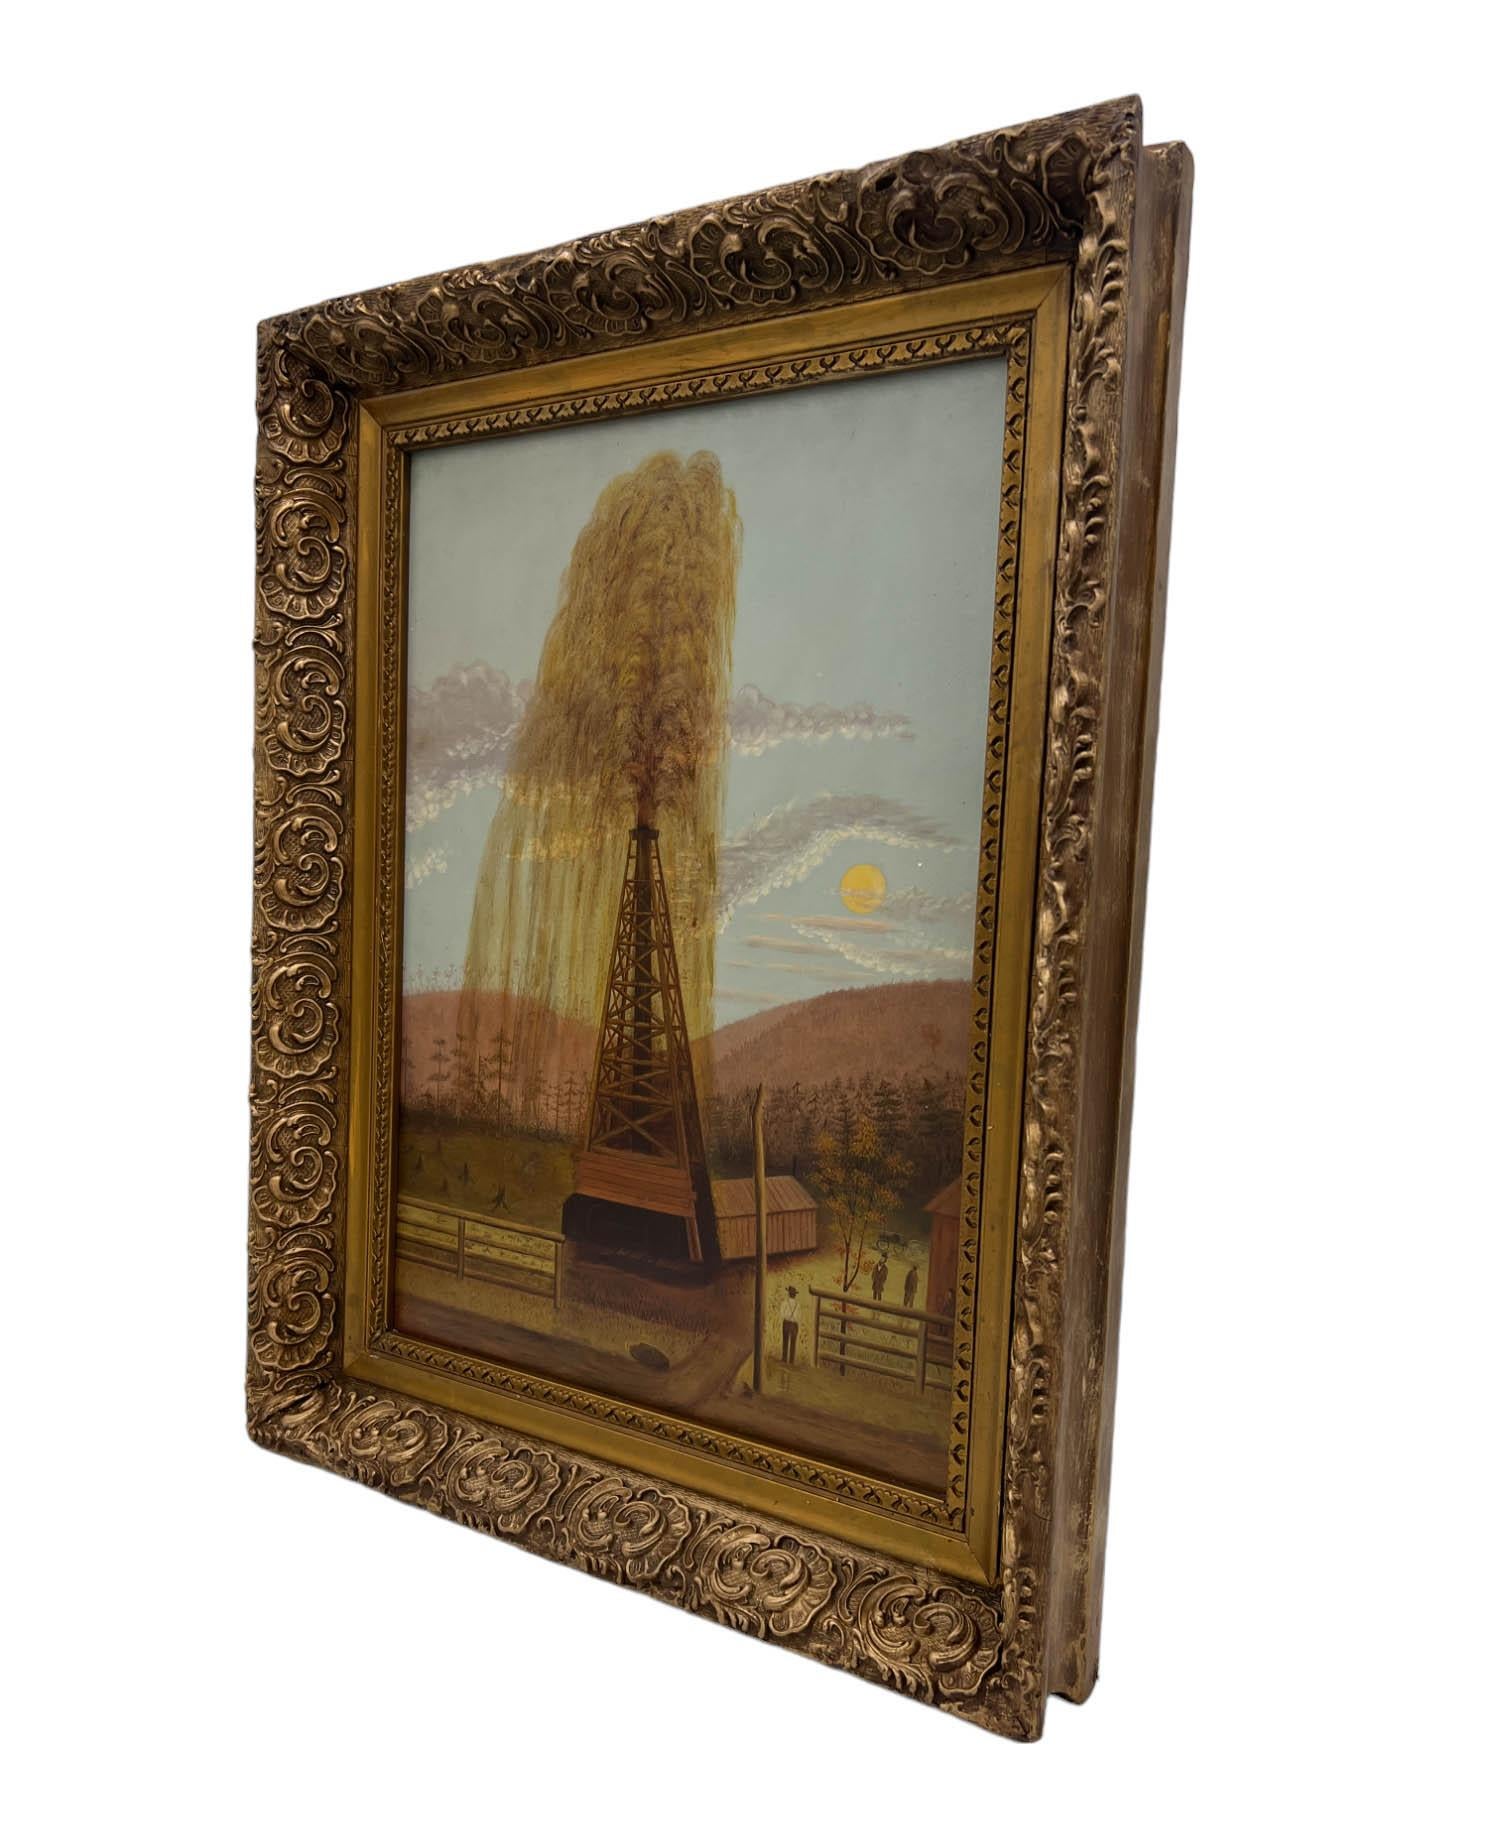 Presenting a captivating and historically significant folk art painting from the late 19th century: an oil rig scene believed to date circa 1892. This remarkable artwork, executed in oil on board, offers a rare glimpse into the early depictions of